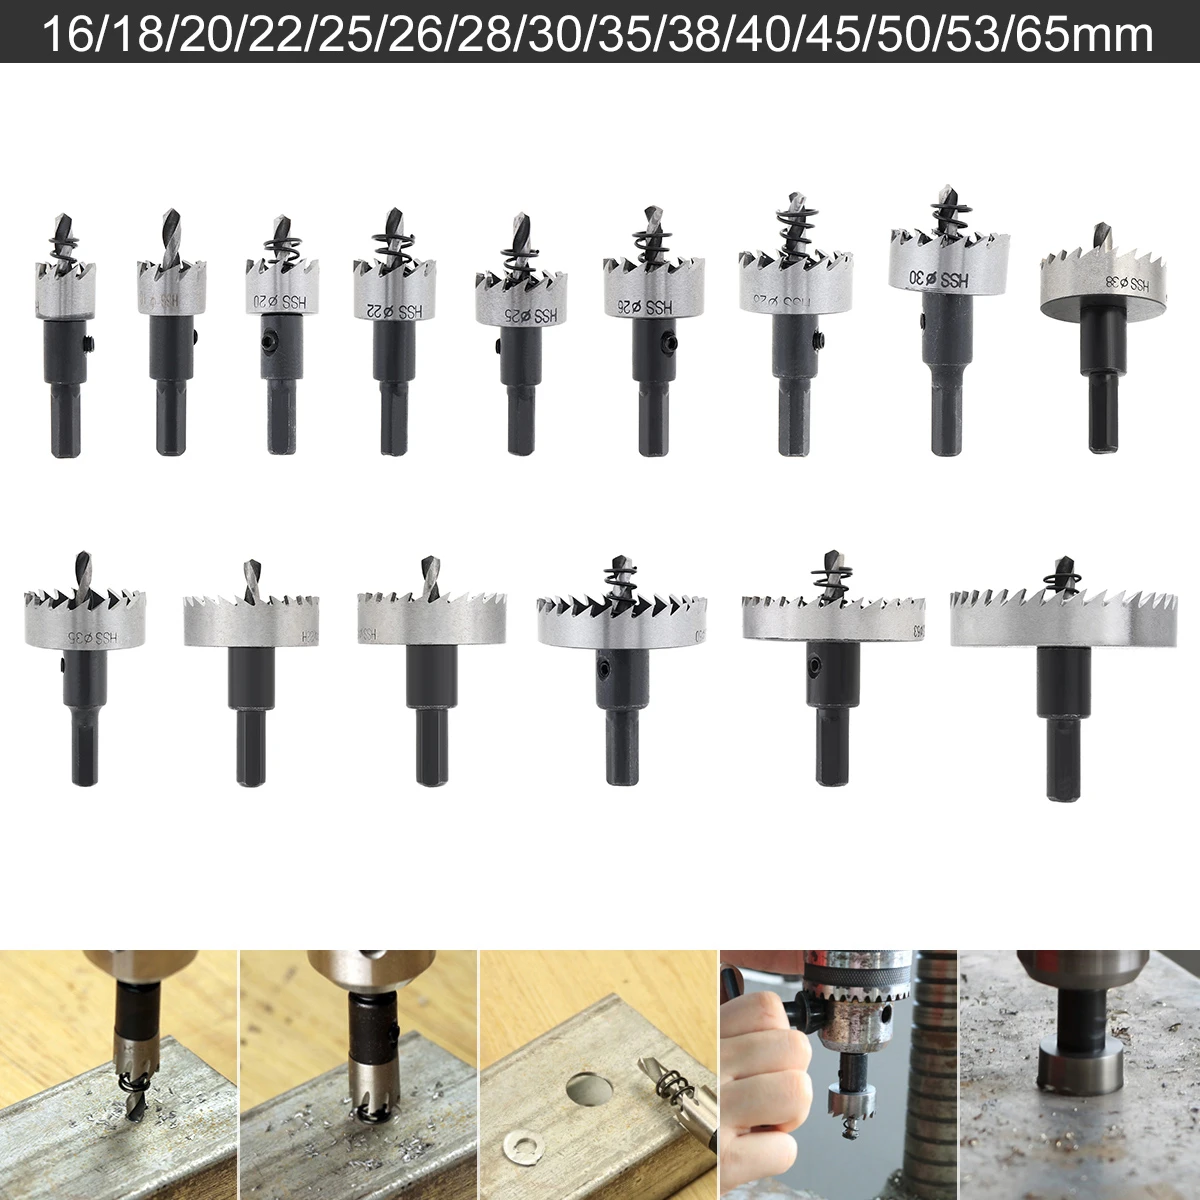 Cutting Thorn Design 45Mm Drill Bit Length 25Mm Drill Hole Drill Bit Set 28Mm Shank Length 4Pcs for Diy Woodworking for Industry Wood Drilling Bit 